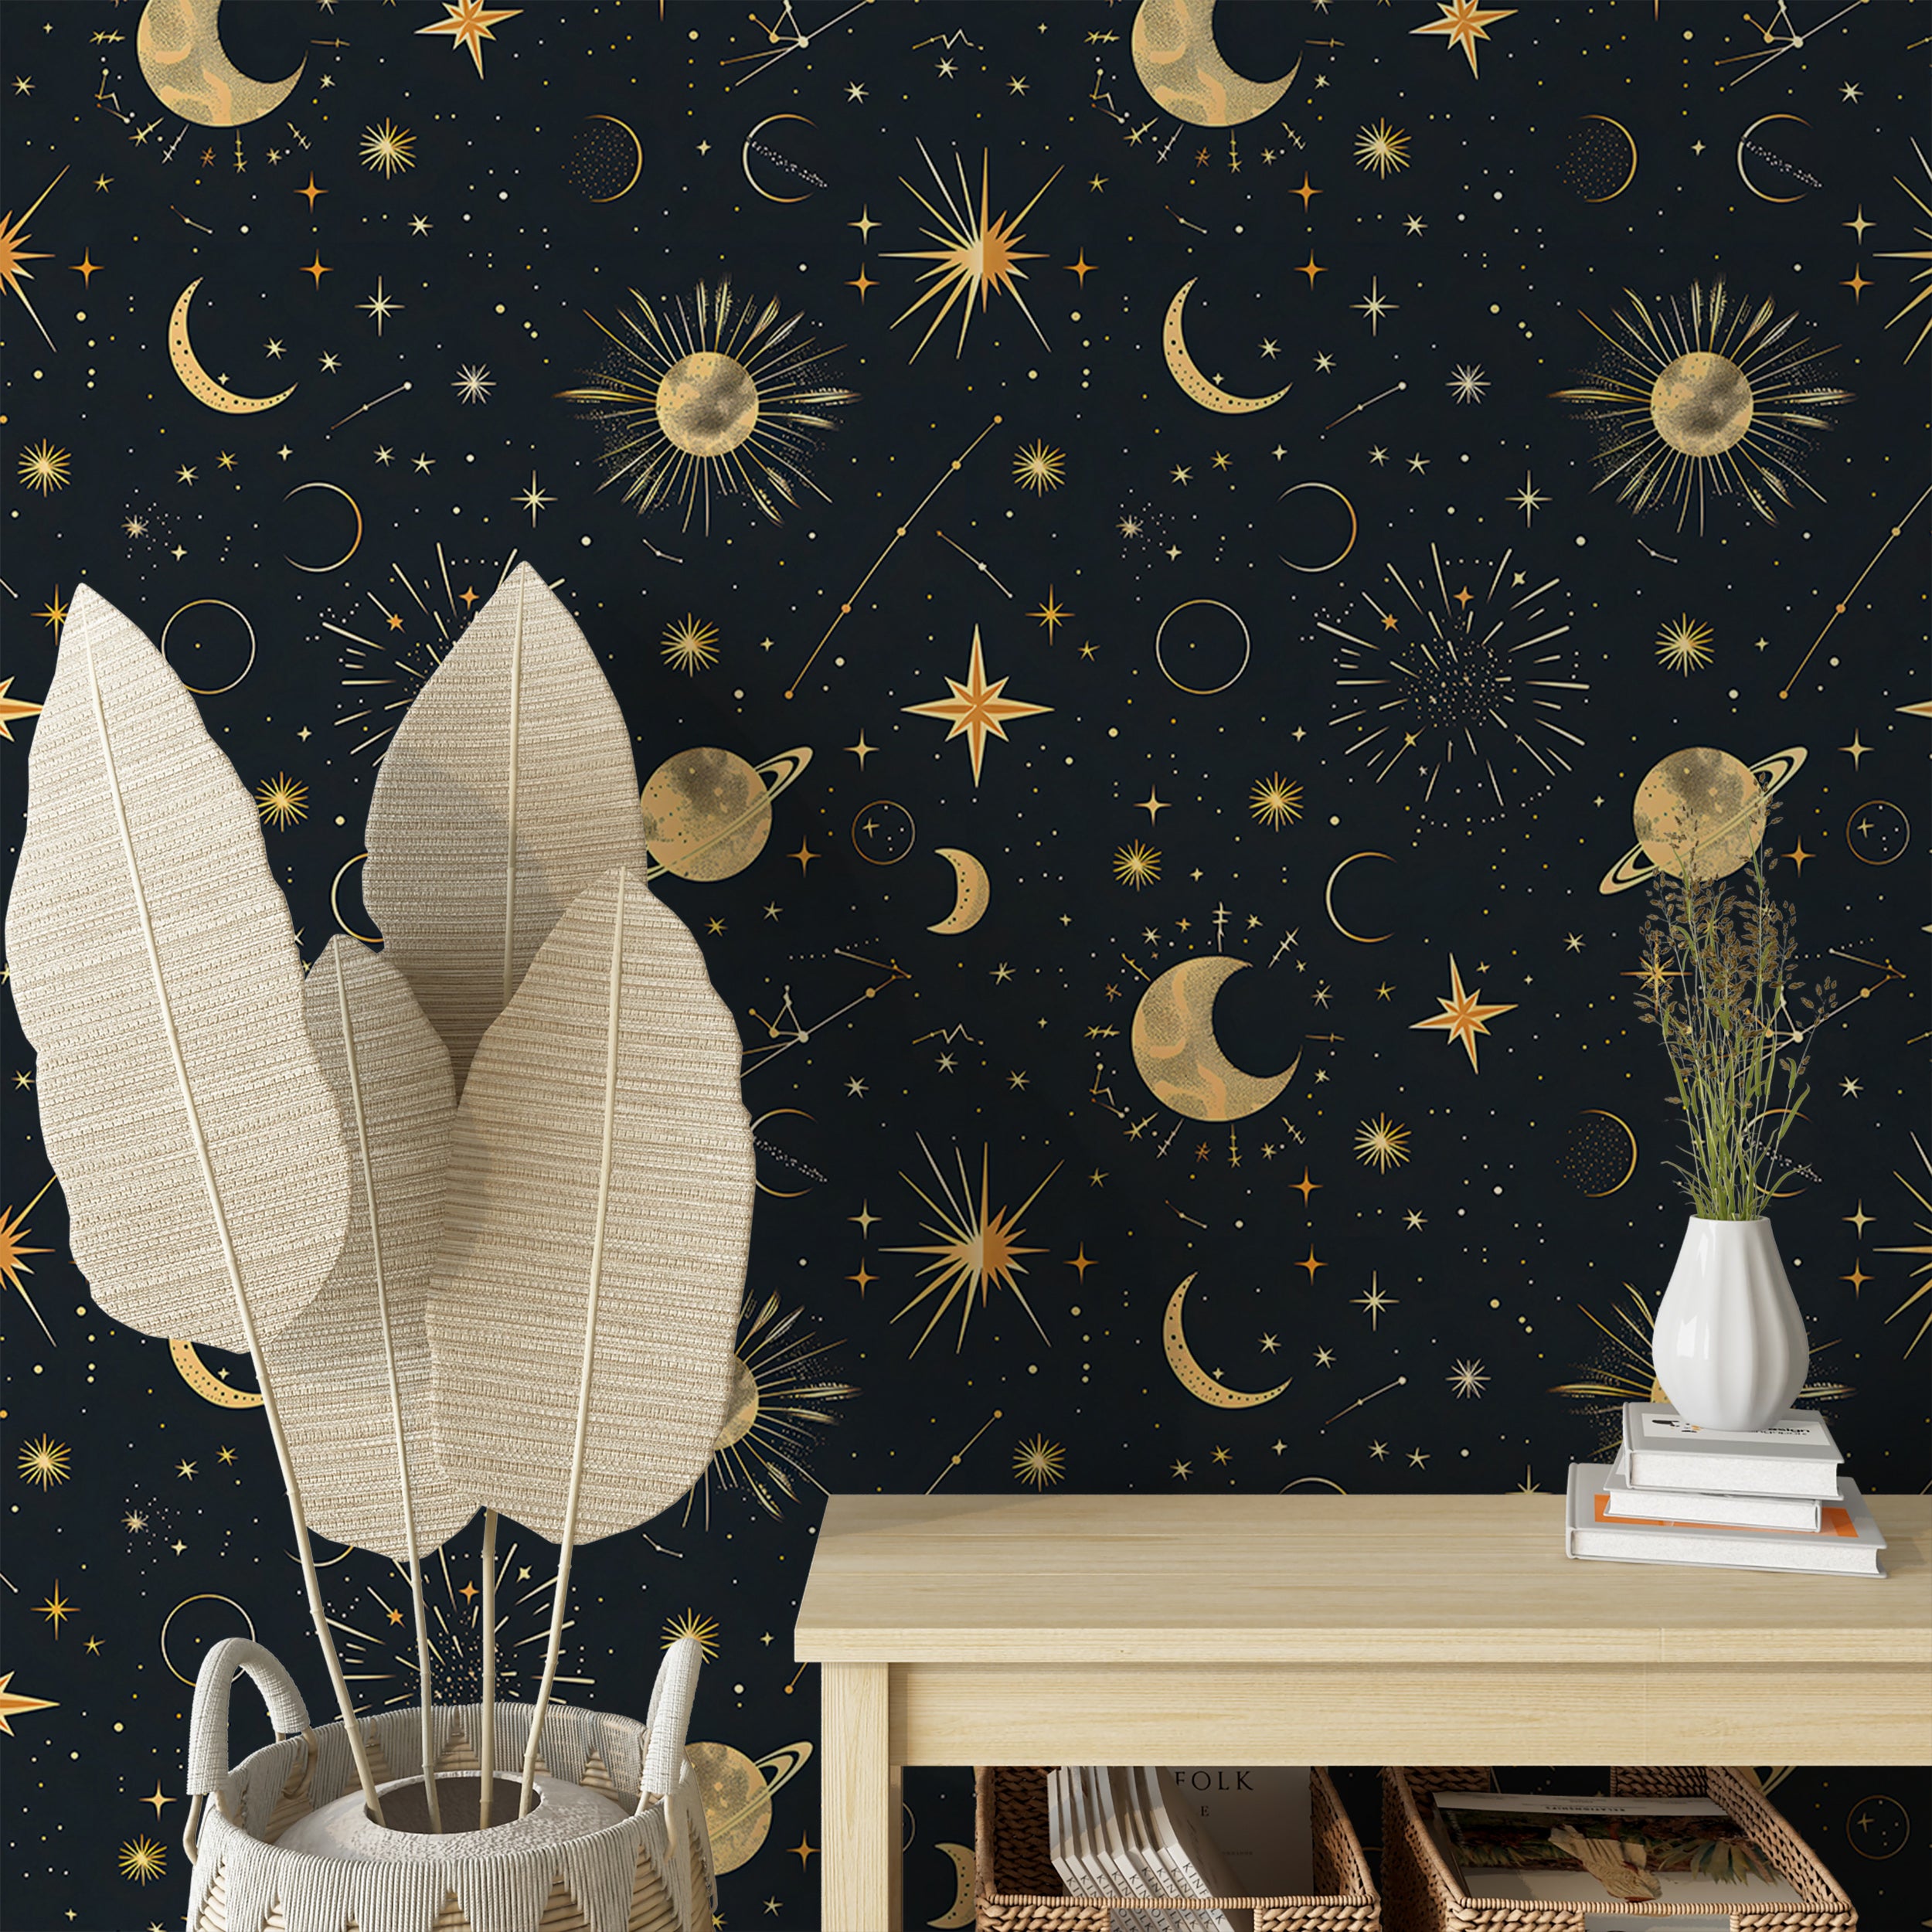 Stars and planets wall art